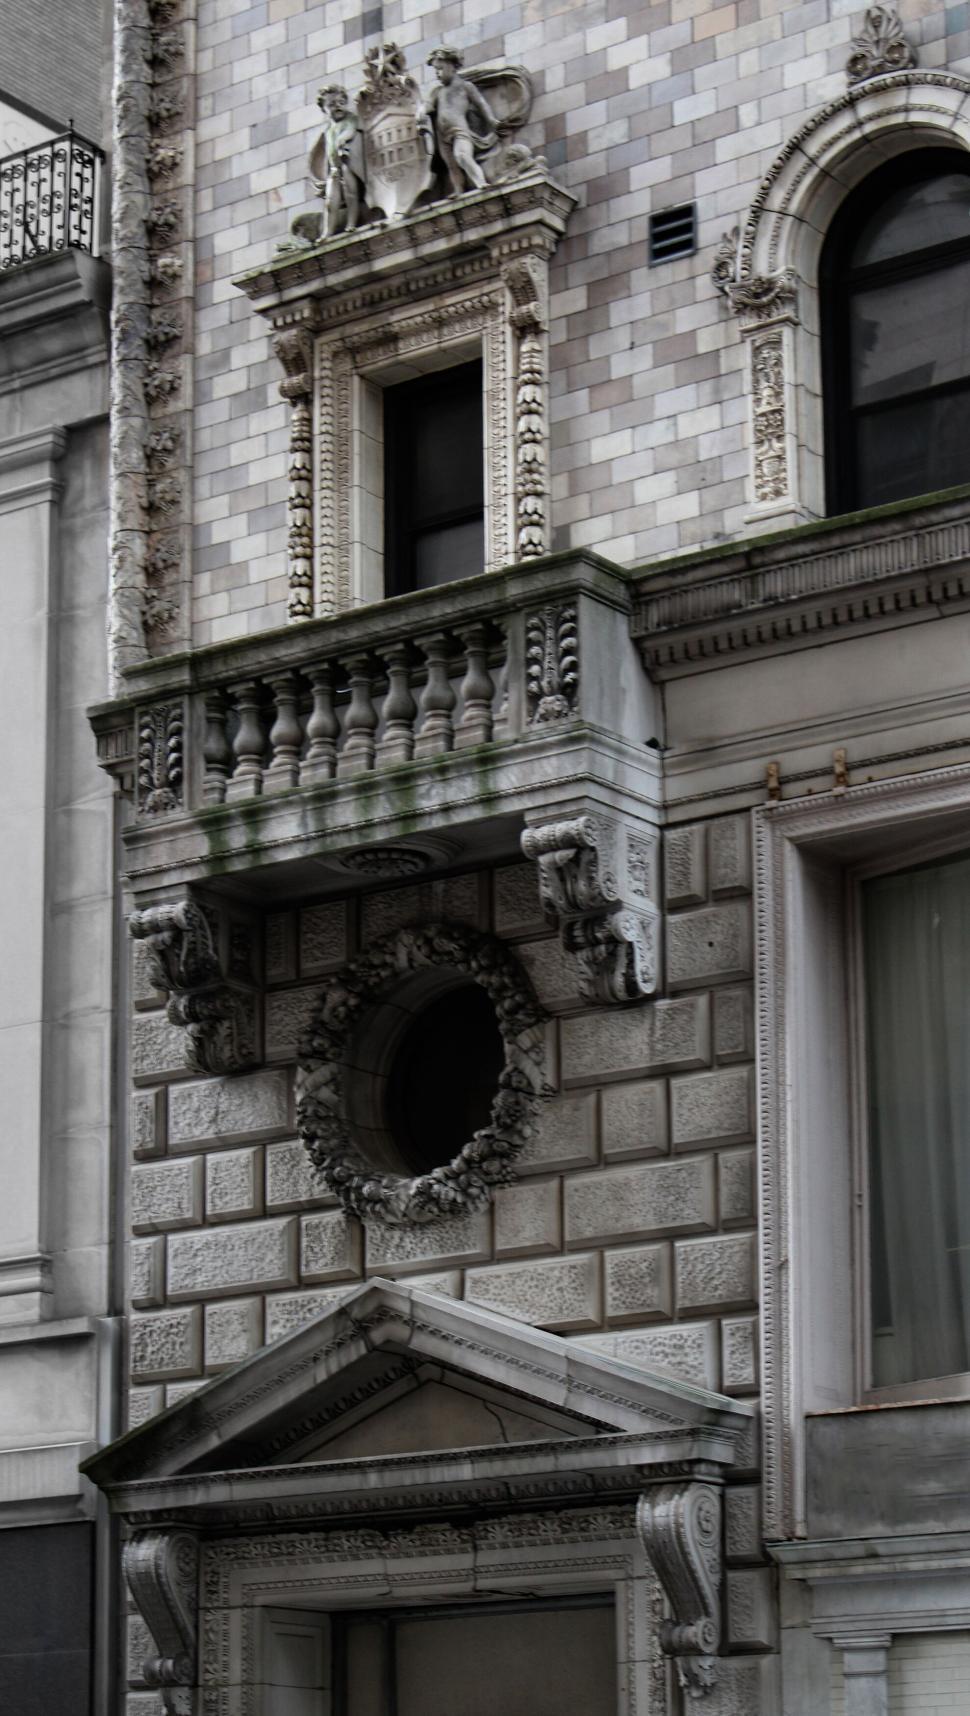 Free Image of Ornate architectural details on a building 